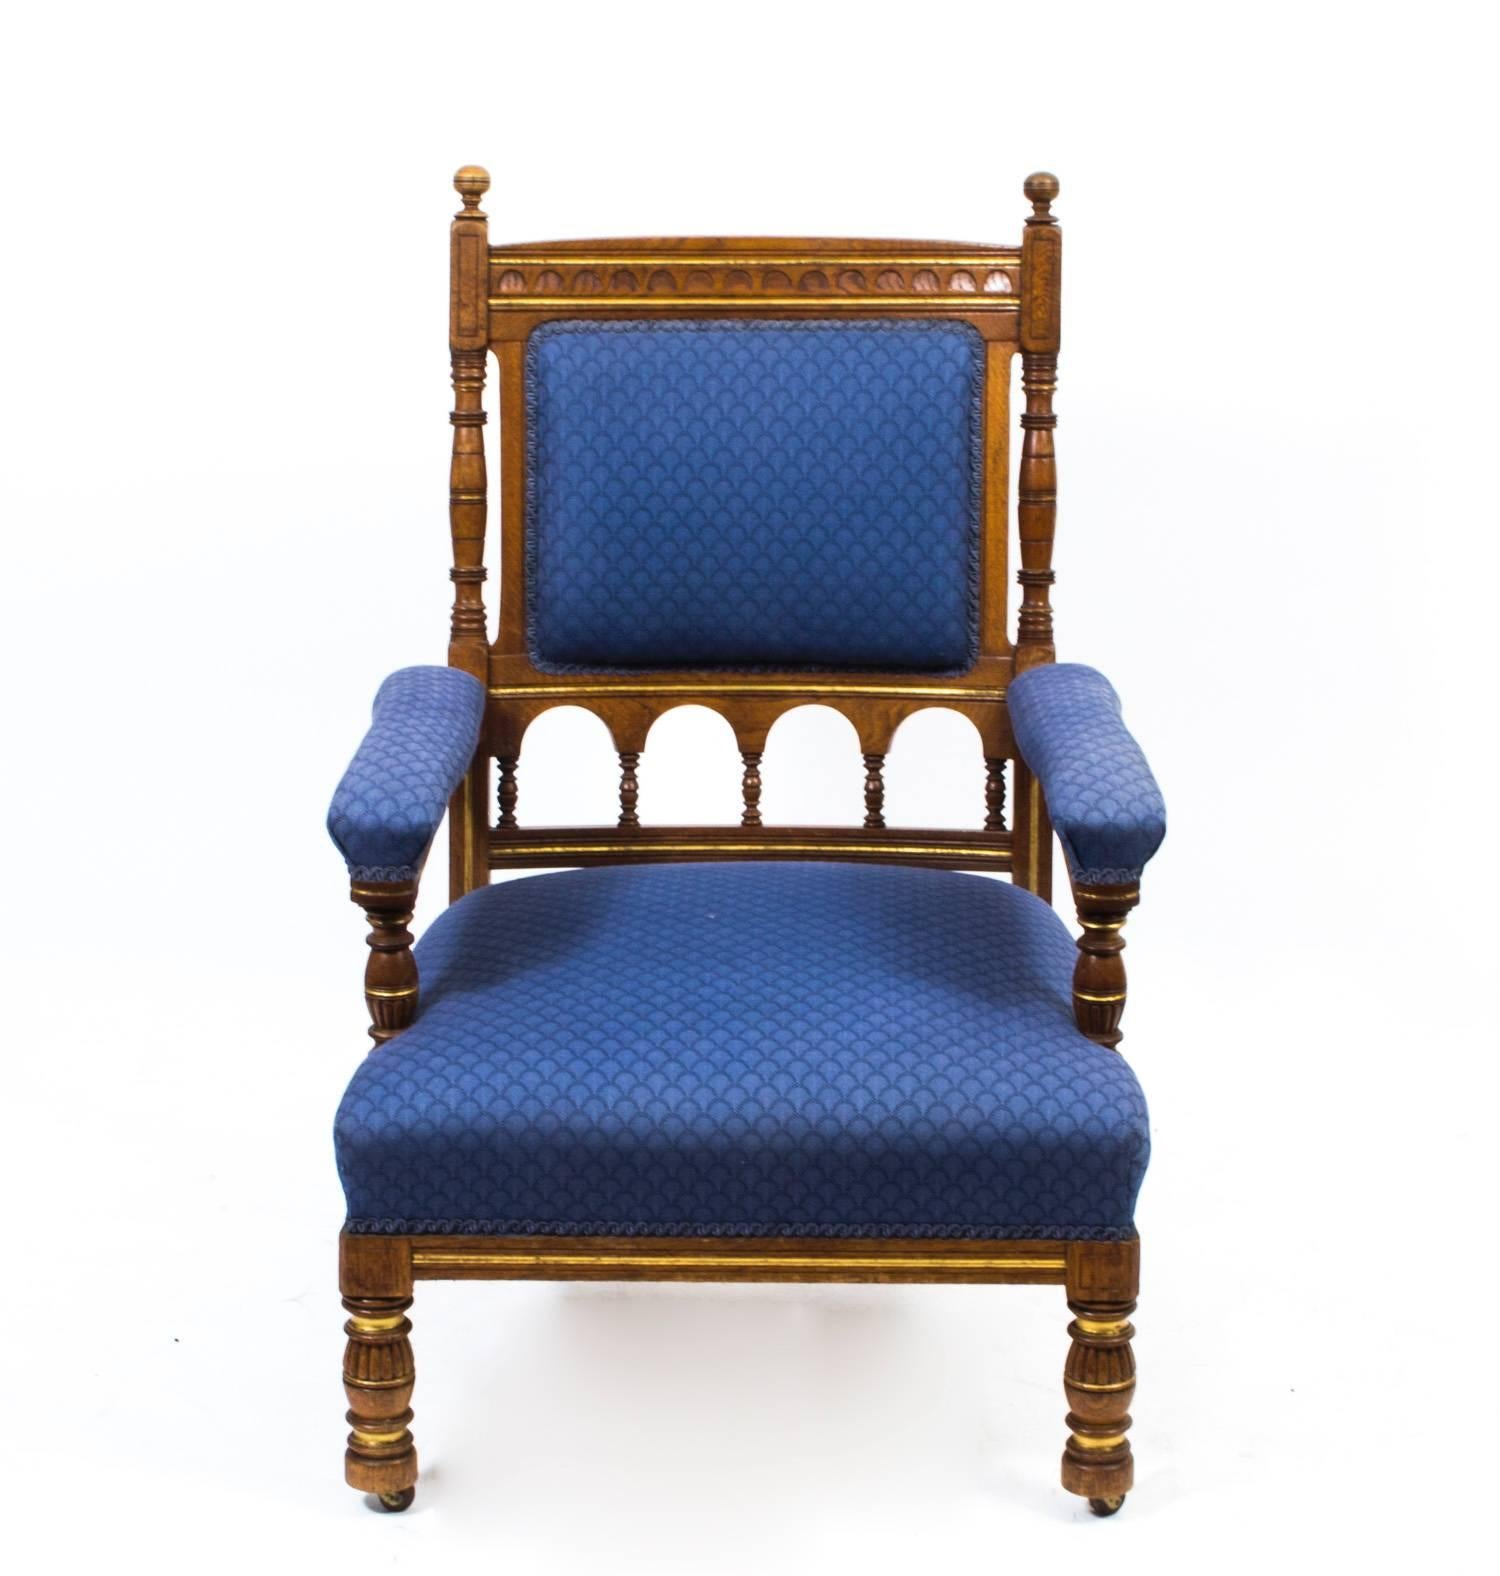 This is a wonderful antique oak armchair attributed to Bruce James Talbert, circa 1860 and manufactured by Gillows & Co. 

It is made of solid oak, has beautiful hand carved decoration and fabulous blue upholstery.

There is no mistaking the